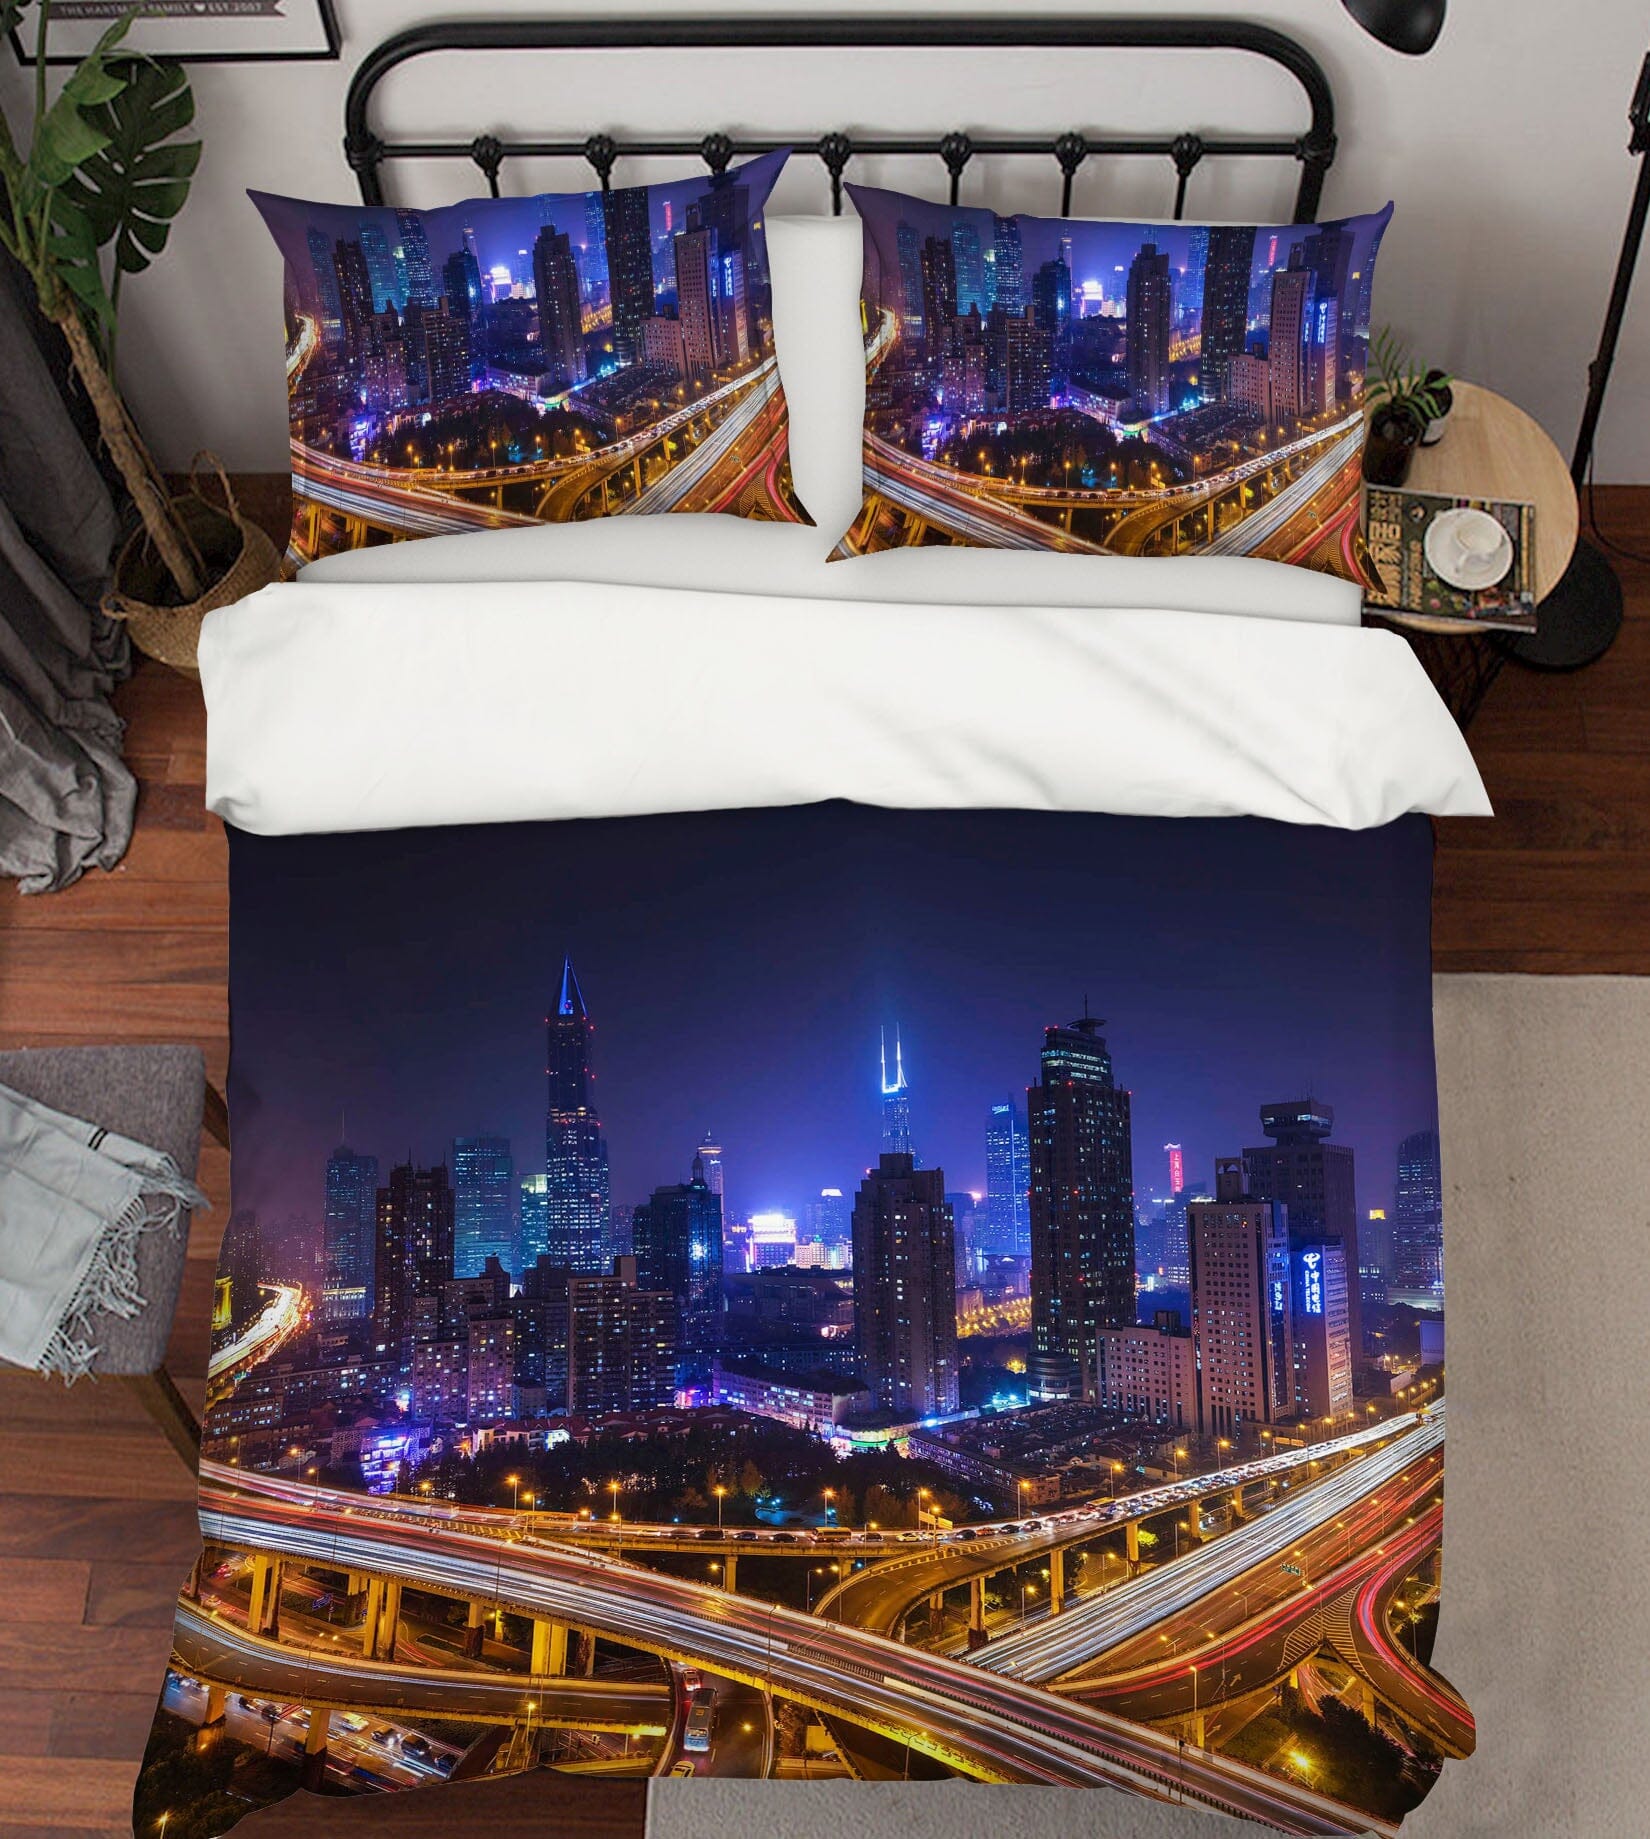 3D Silent City 2107 Marco Carmassi Bedding Bed Pillowcases Quilt Quiet Covers AJ Creativity Home 